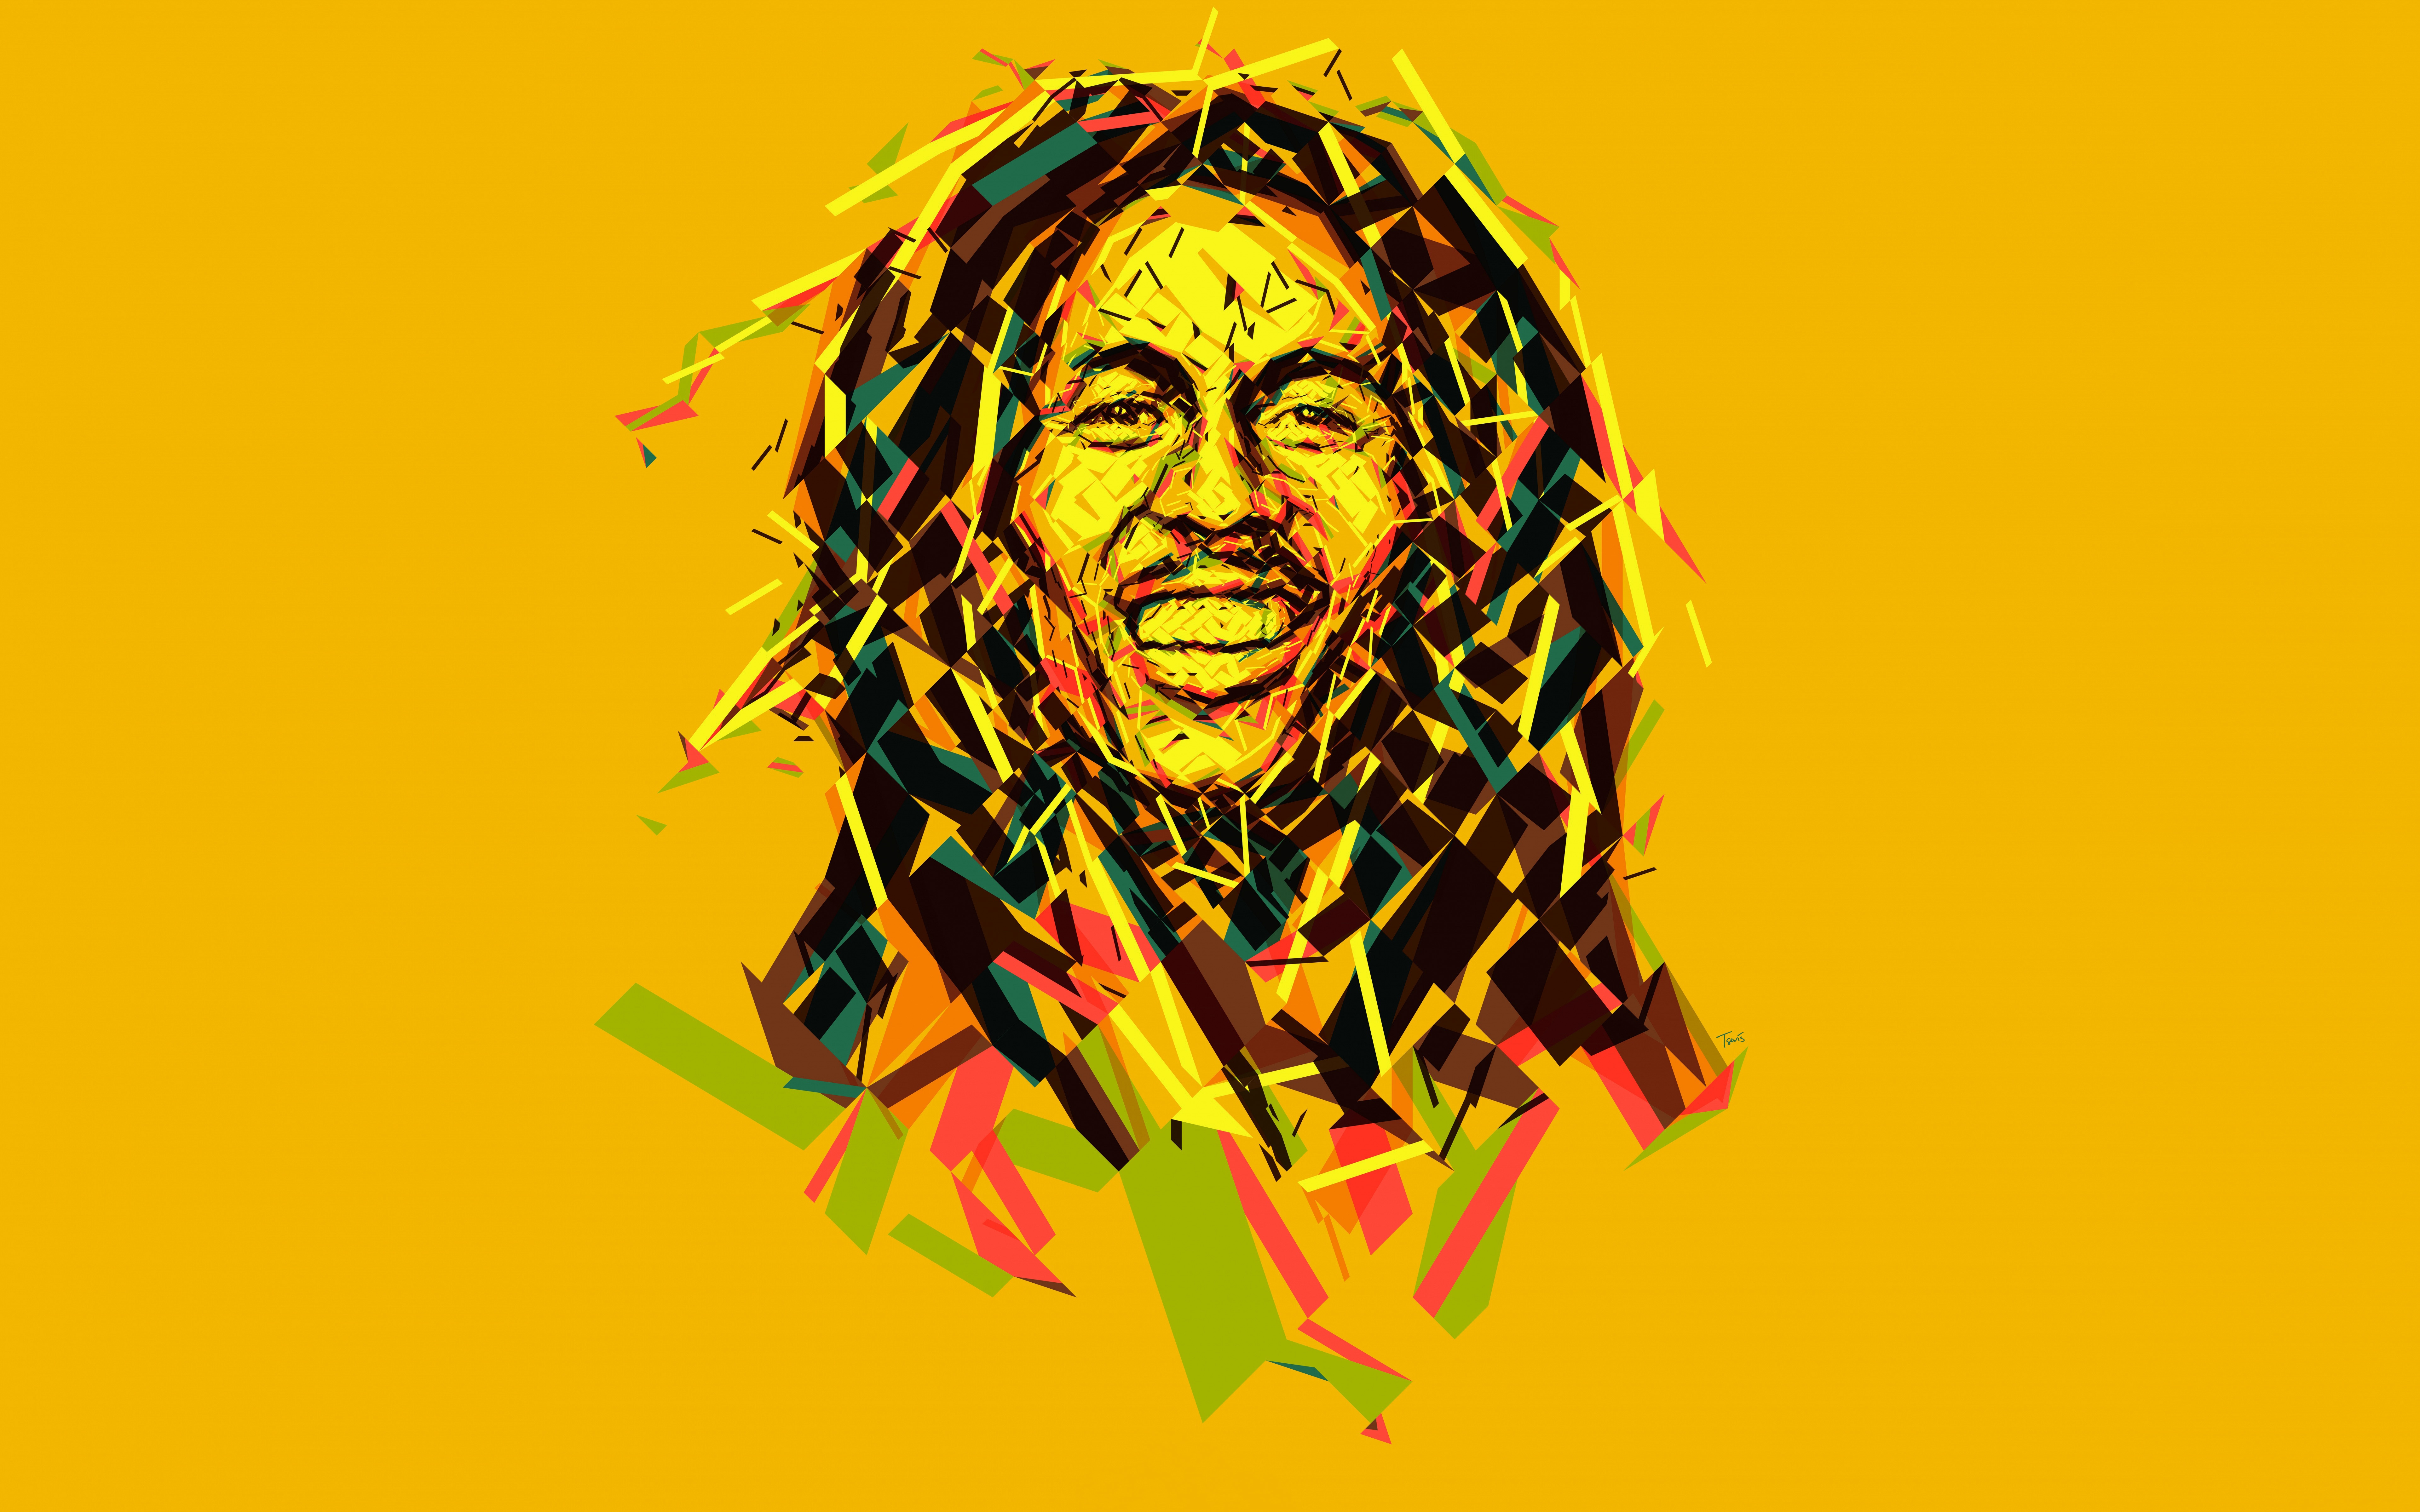 bob marley, music, colors, face, jamaican, singer, smile images